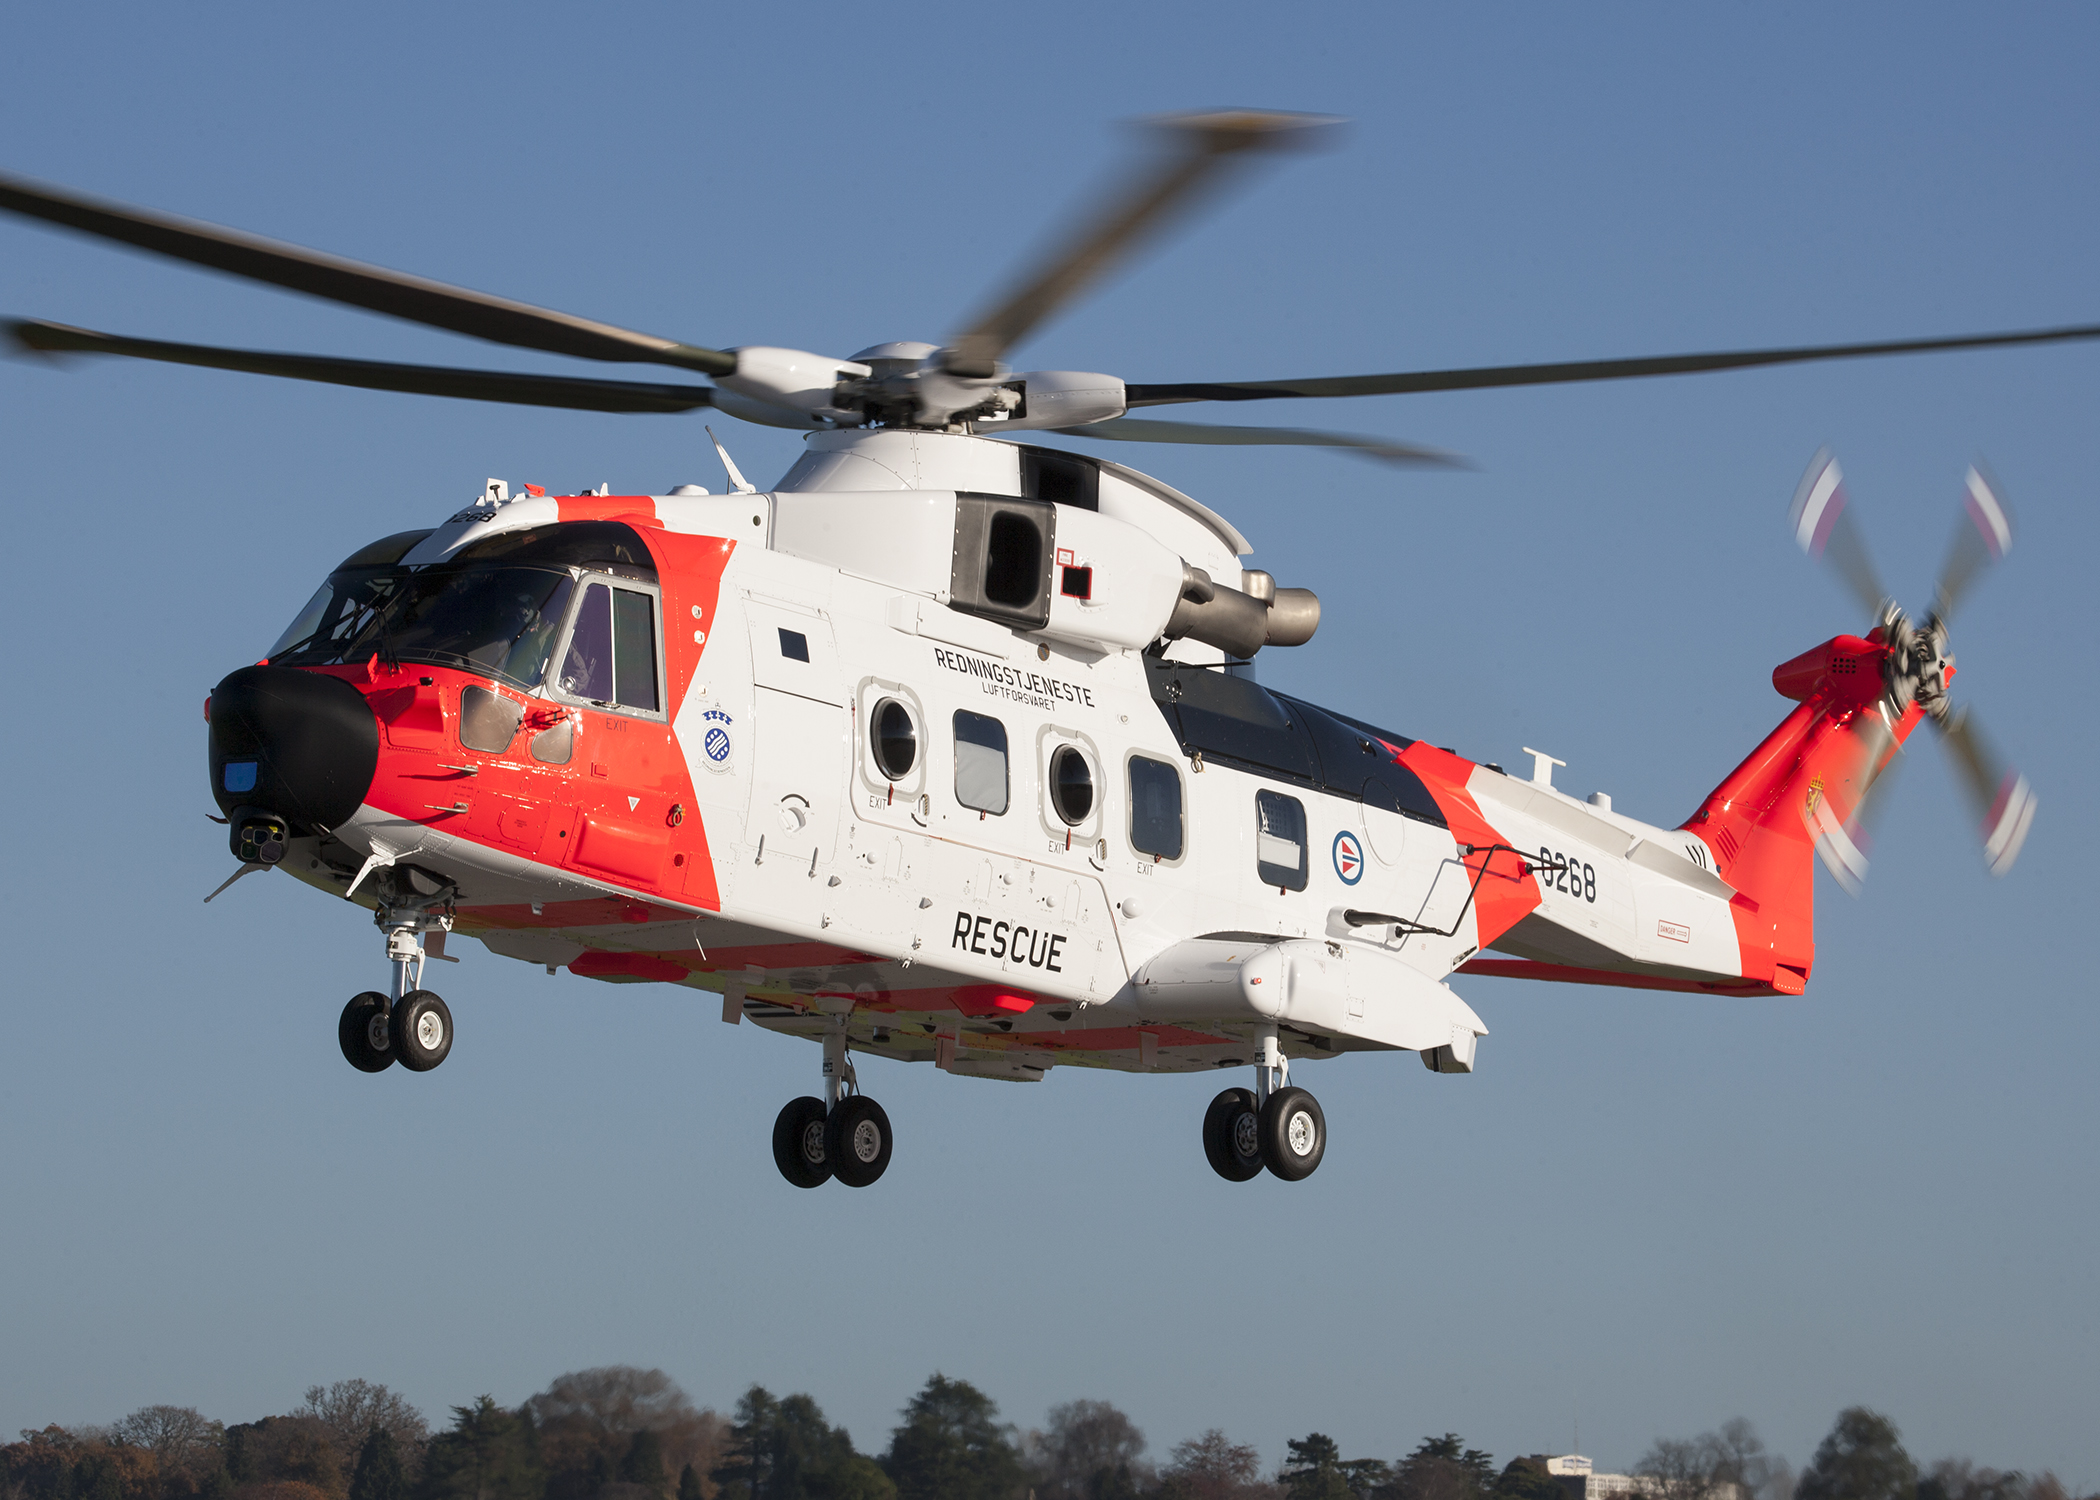 The Leonardo AW101 was delivered a week ago, and was still a month away from its official delivery ceremony. Leonardo Photo